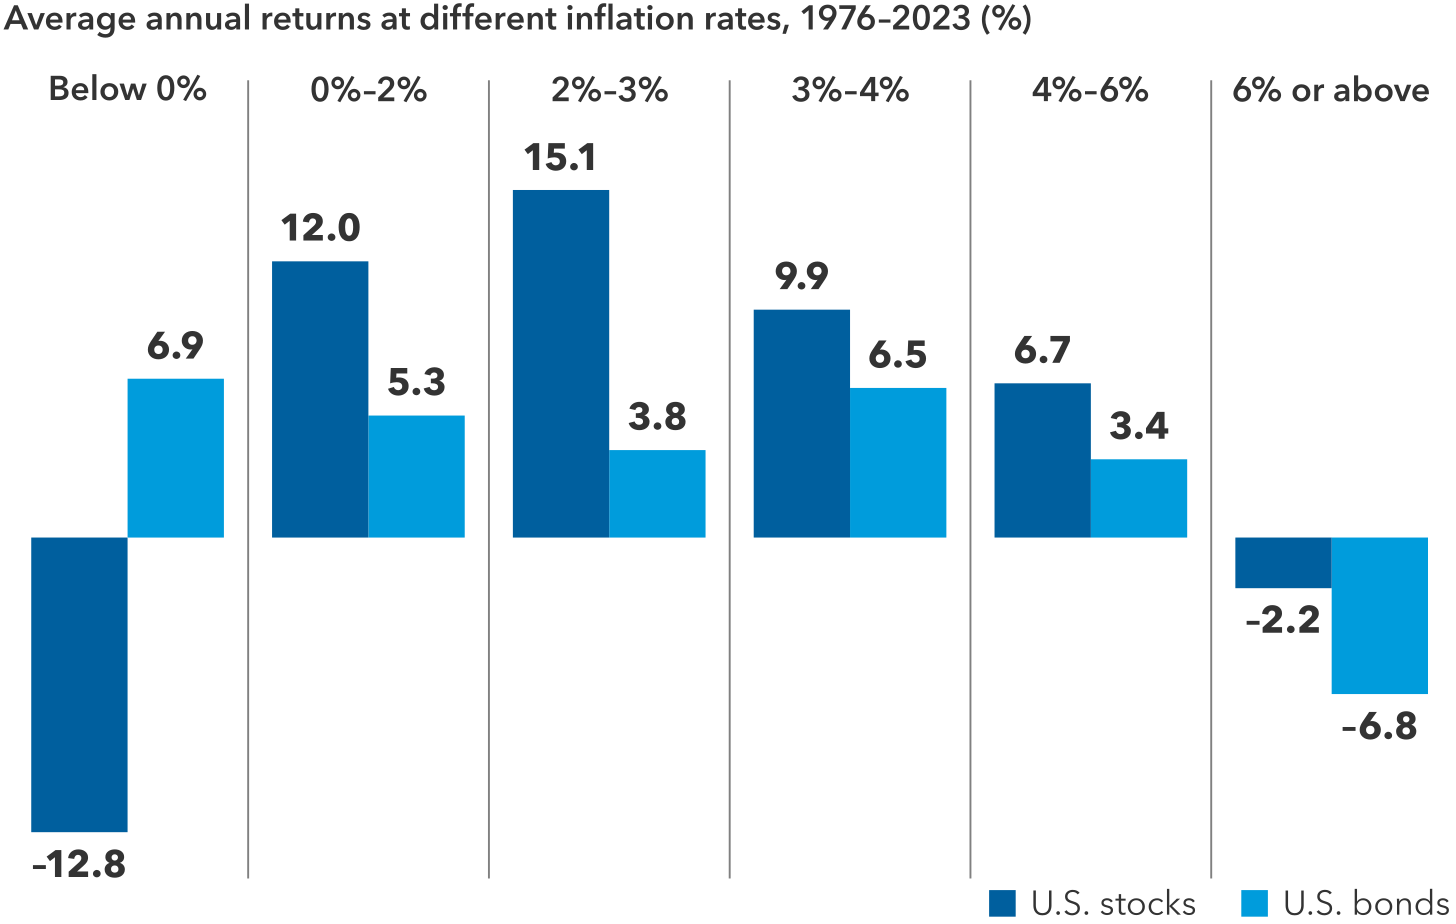 The image above is a vertical bar chart showing the average annual returns for U.S. stocks, shown in dark blue, and U.S. bonds, shown in light blue, at different inflation rates for the years 1976–2023. The horizontal axis shows the inflation rate in percentages: Below 0%, 0%-2%, 2%-3%, 3%-4%, 4%-6% and 6% or above. When inflation was below 0%, stock returns fell 12.8% while bonds returned 6.9%. When inflation was 0% to 2%, stocks returned 12.0% and bonds returned 5.3%. When inflation was between 2% to 3%, stocks returned 15.1% and bonds returned 3.8%. When inflation was 3% to 4% stocks returned 9.9% and bonds returned 6.5%. When inflation was 4% to 6%, stocks returned 6.7% and bonds returned 3.4%. Lastly, when inflation was 6% or above, stock returns fell 2.2% and bond returns fell 6.8%.